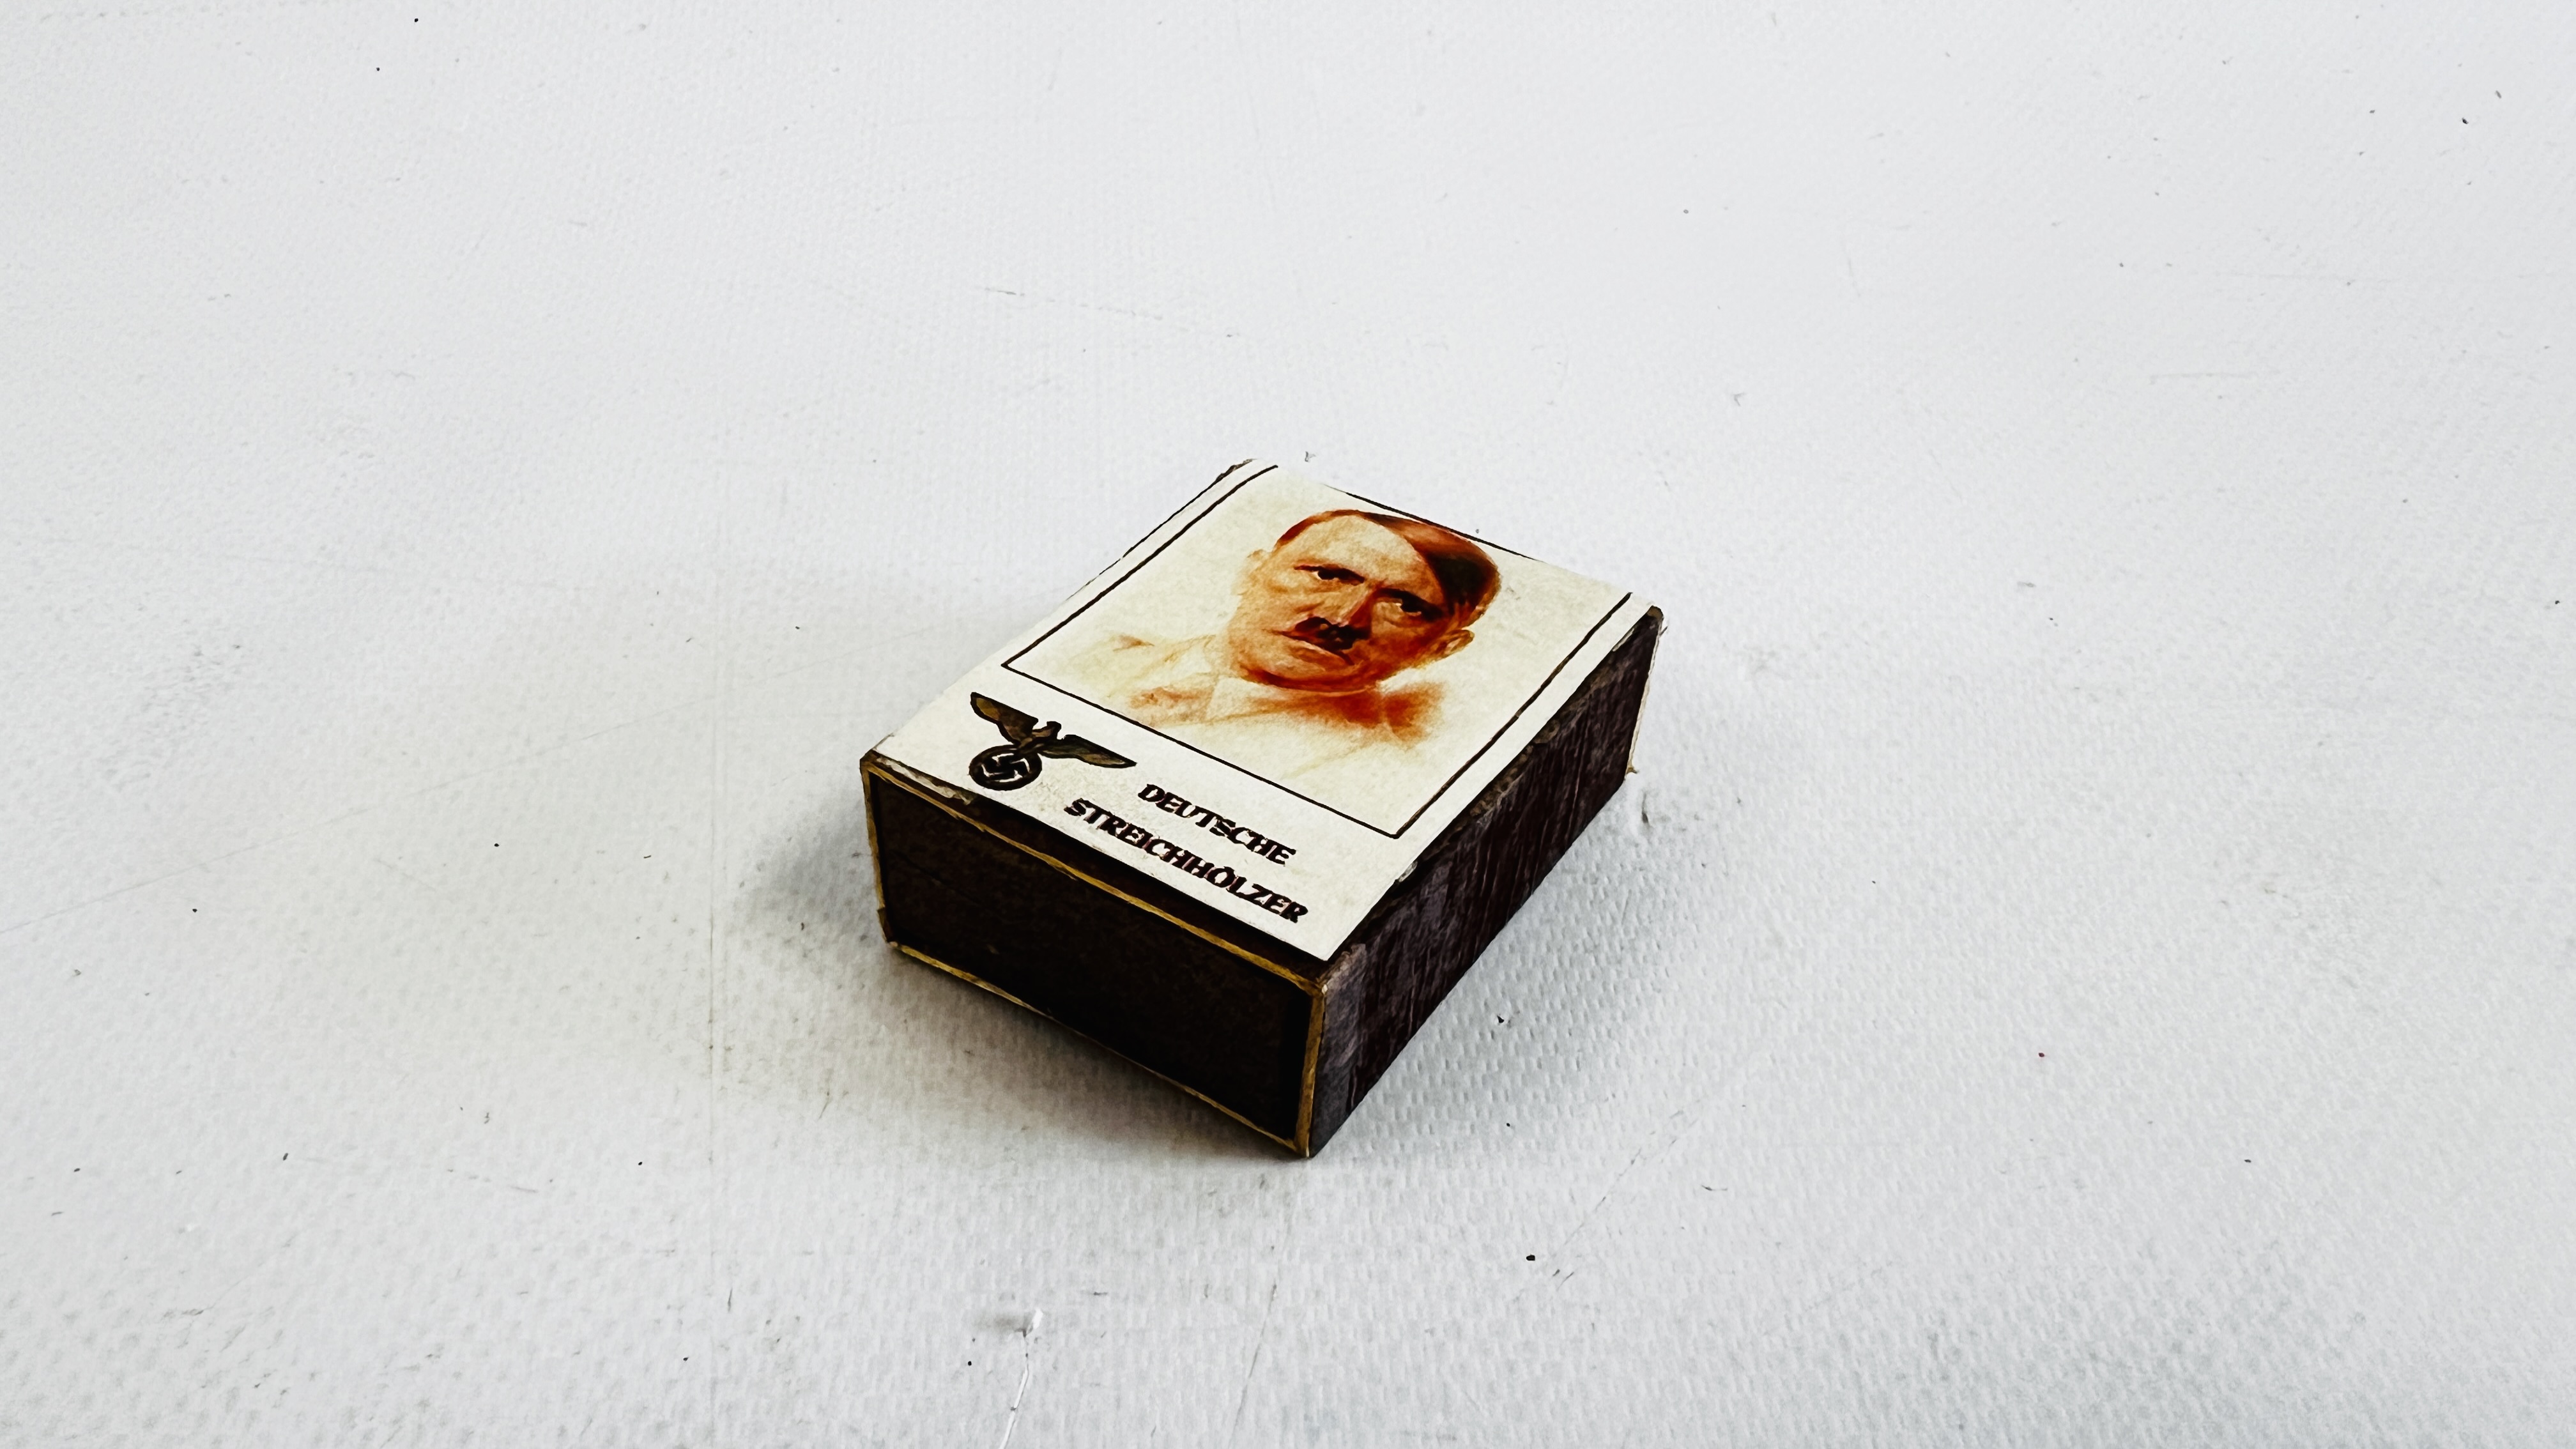 A GROUP THREE MATCHBOXES DEPICTING AN IMAGE OF "HITLER". - Image 4 of 6